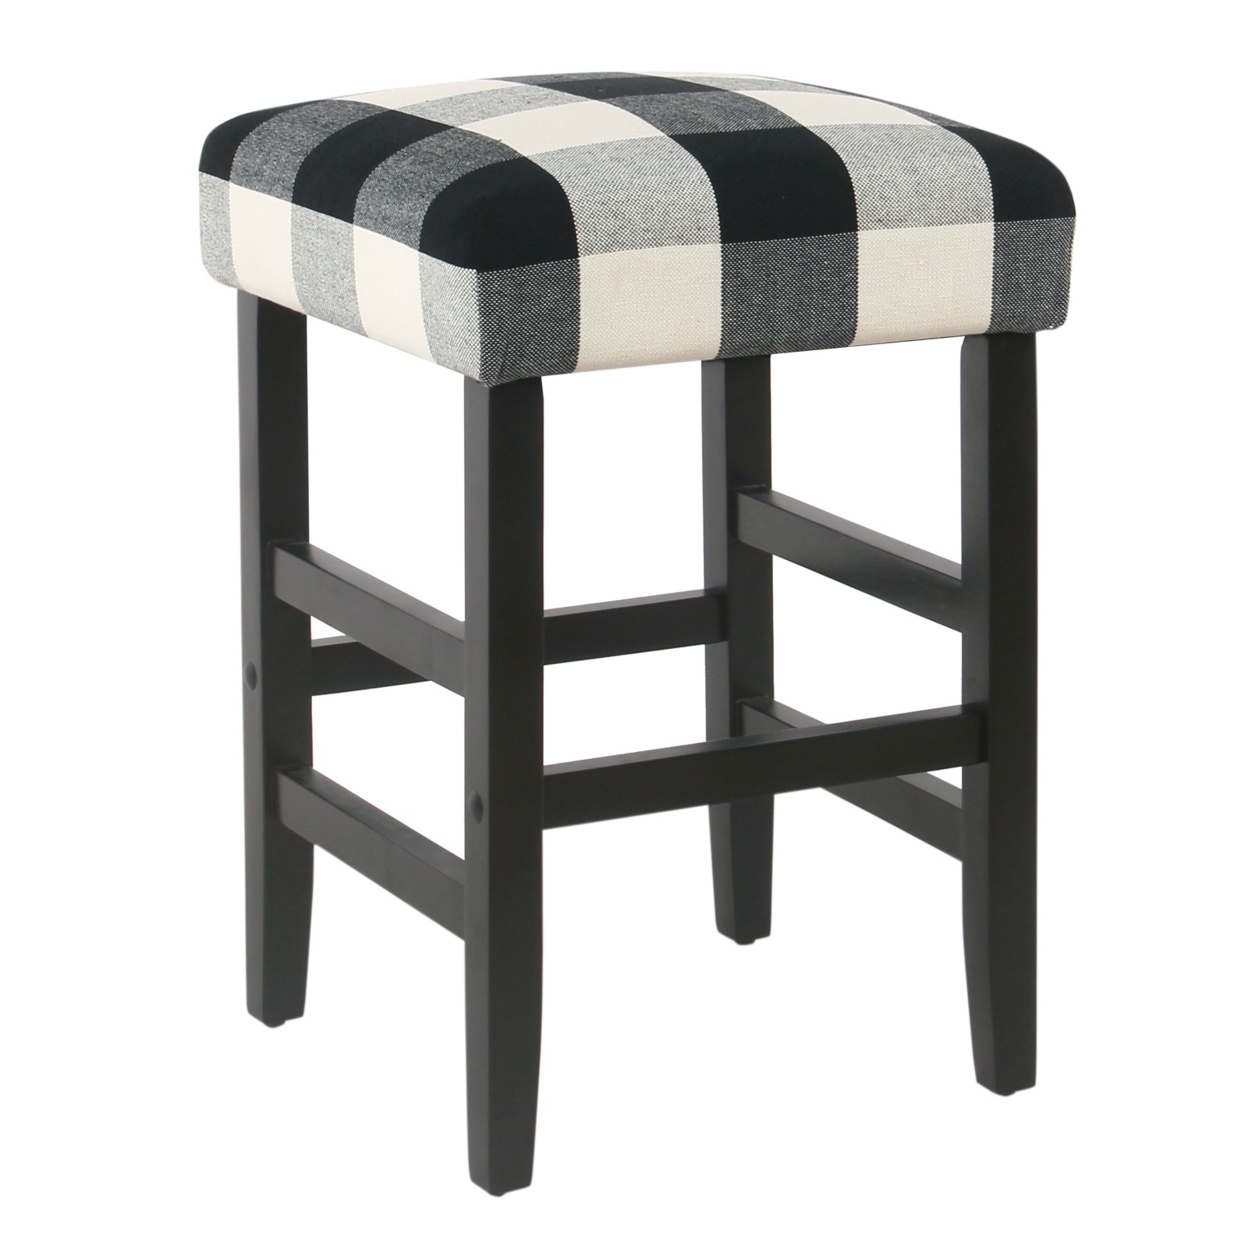 Square Wooden Counter Stool With Buffalo Plaid Fabric Upholstered Seat, Black And White- Saltoro Sherpi